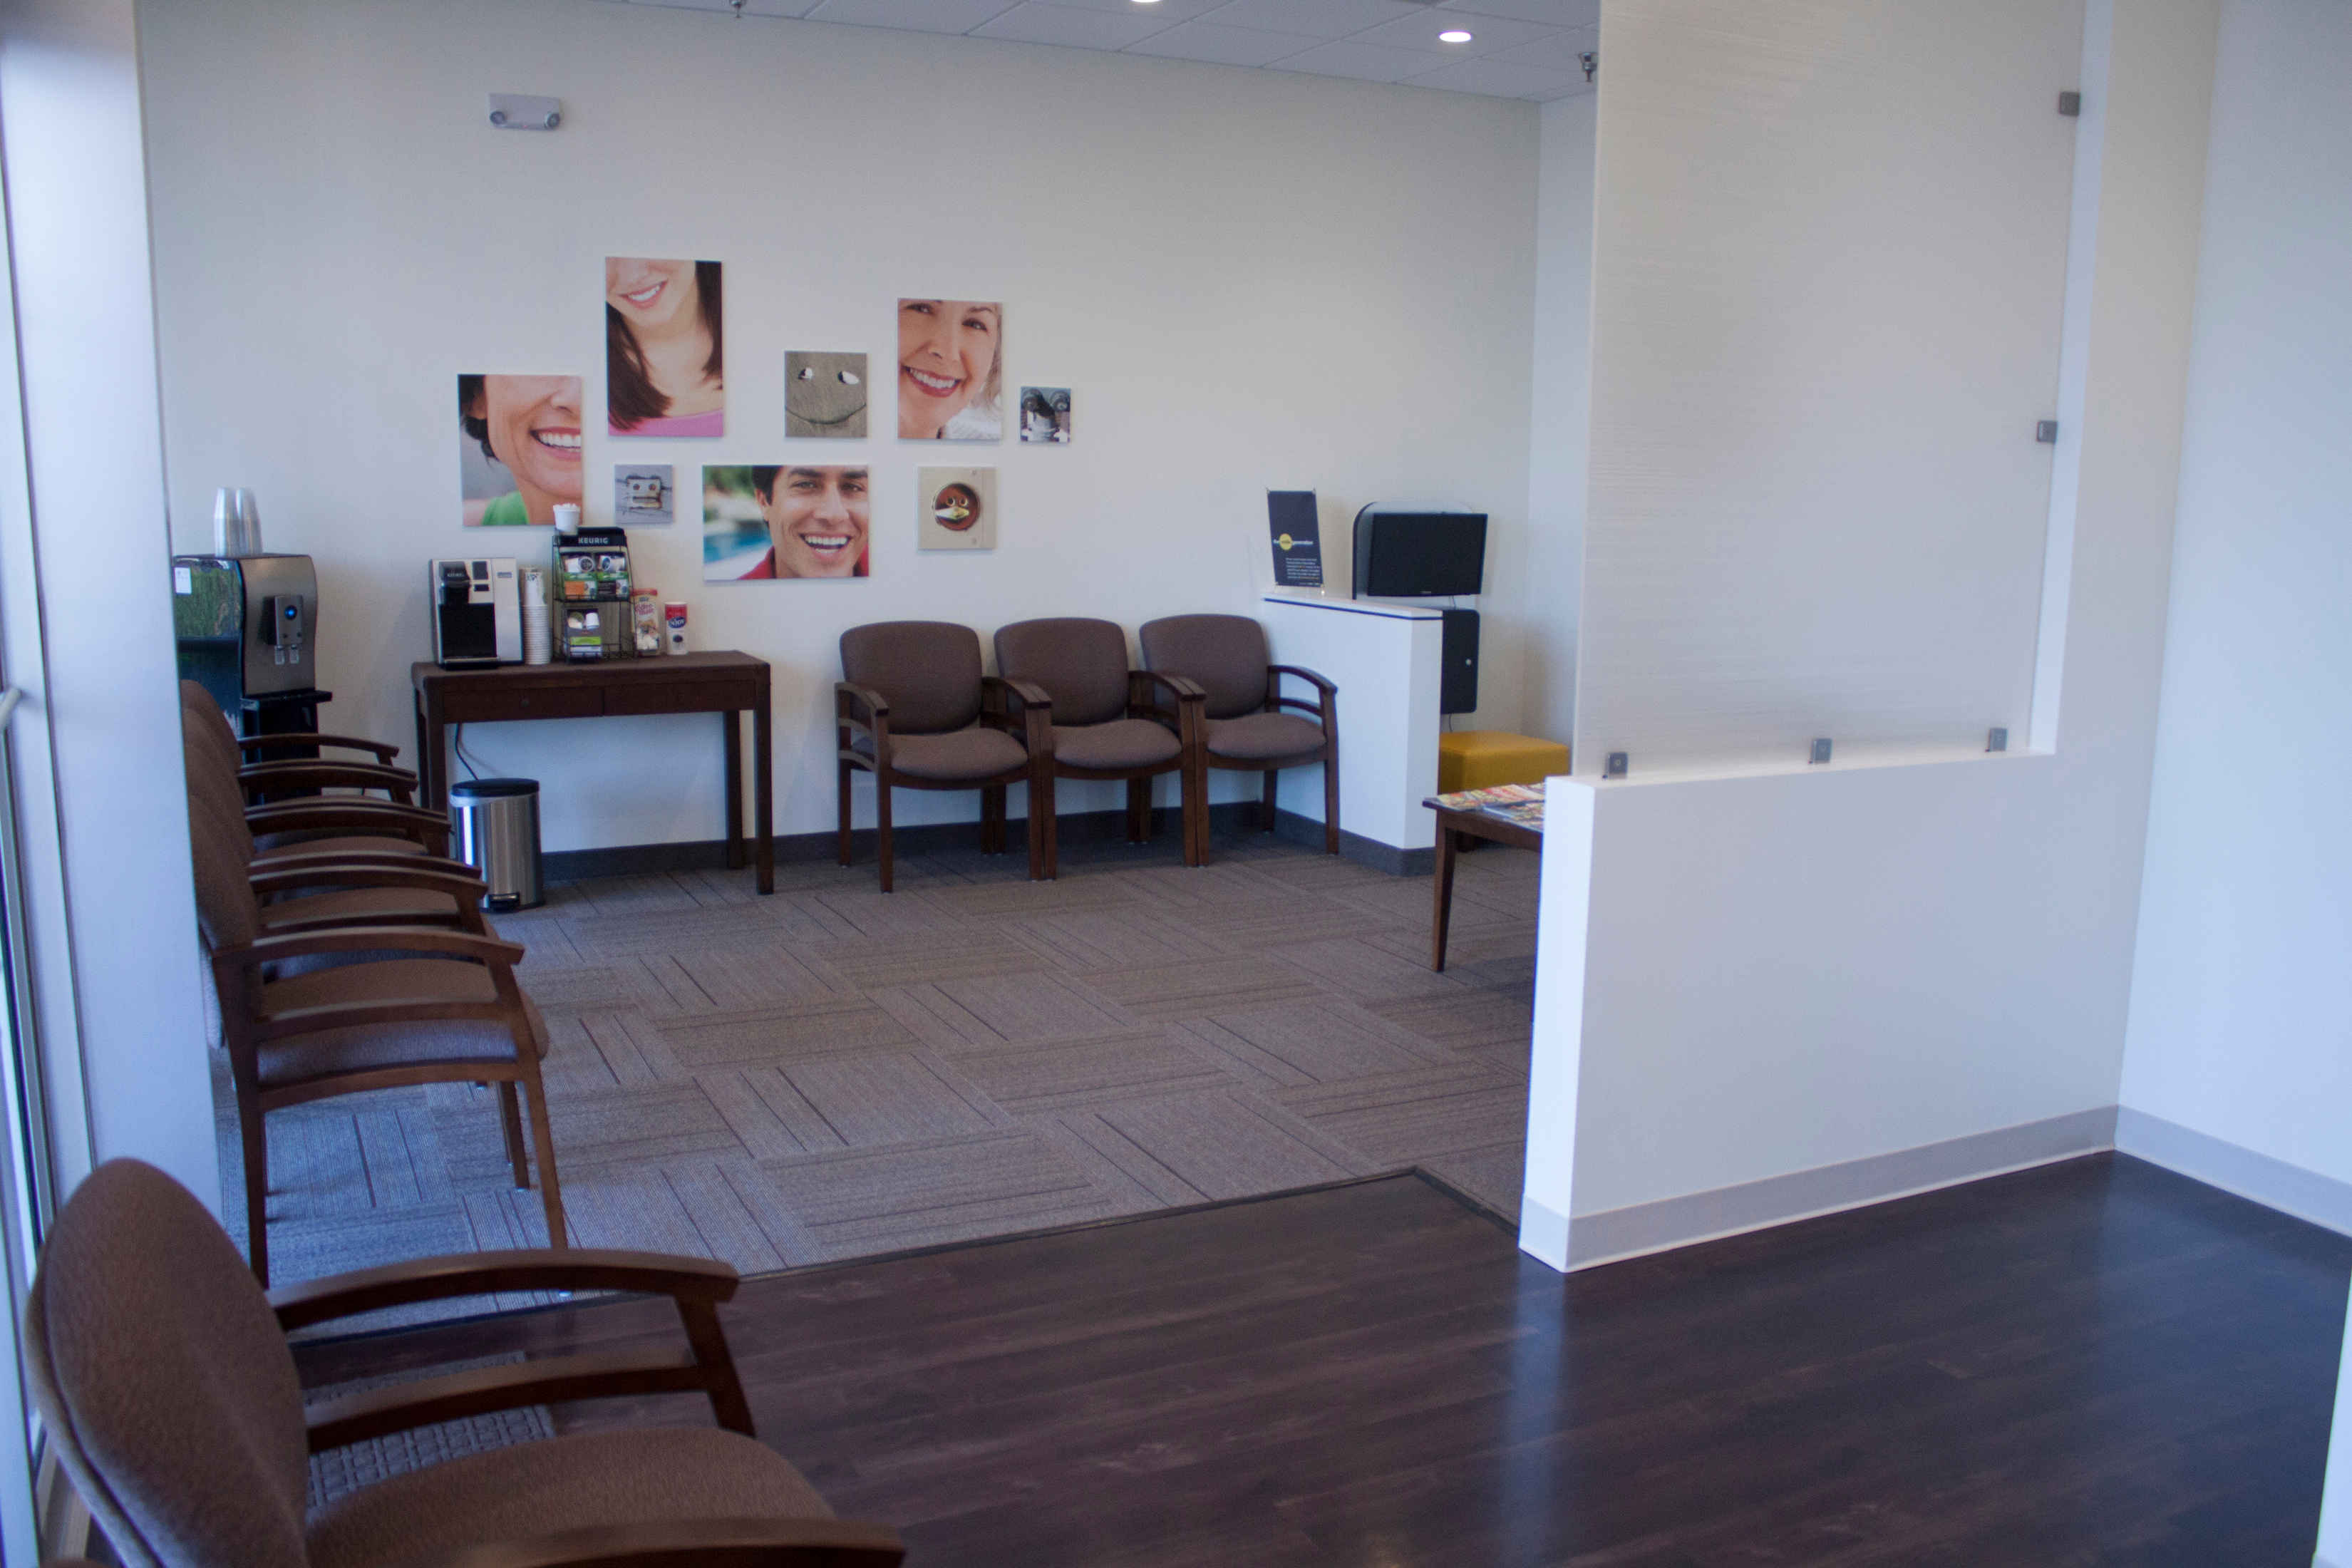 Macon Dentist Office opened its doors to the Macon community in May 2016.